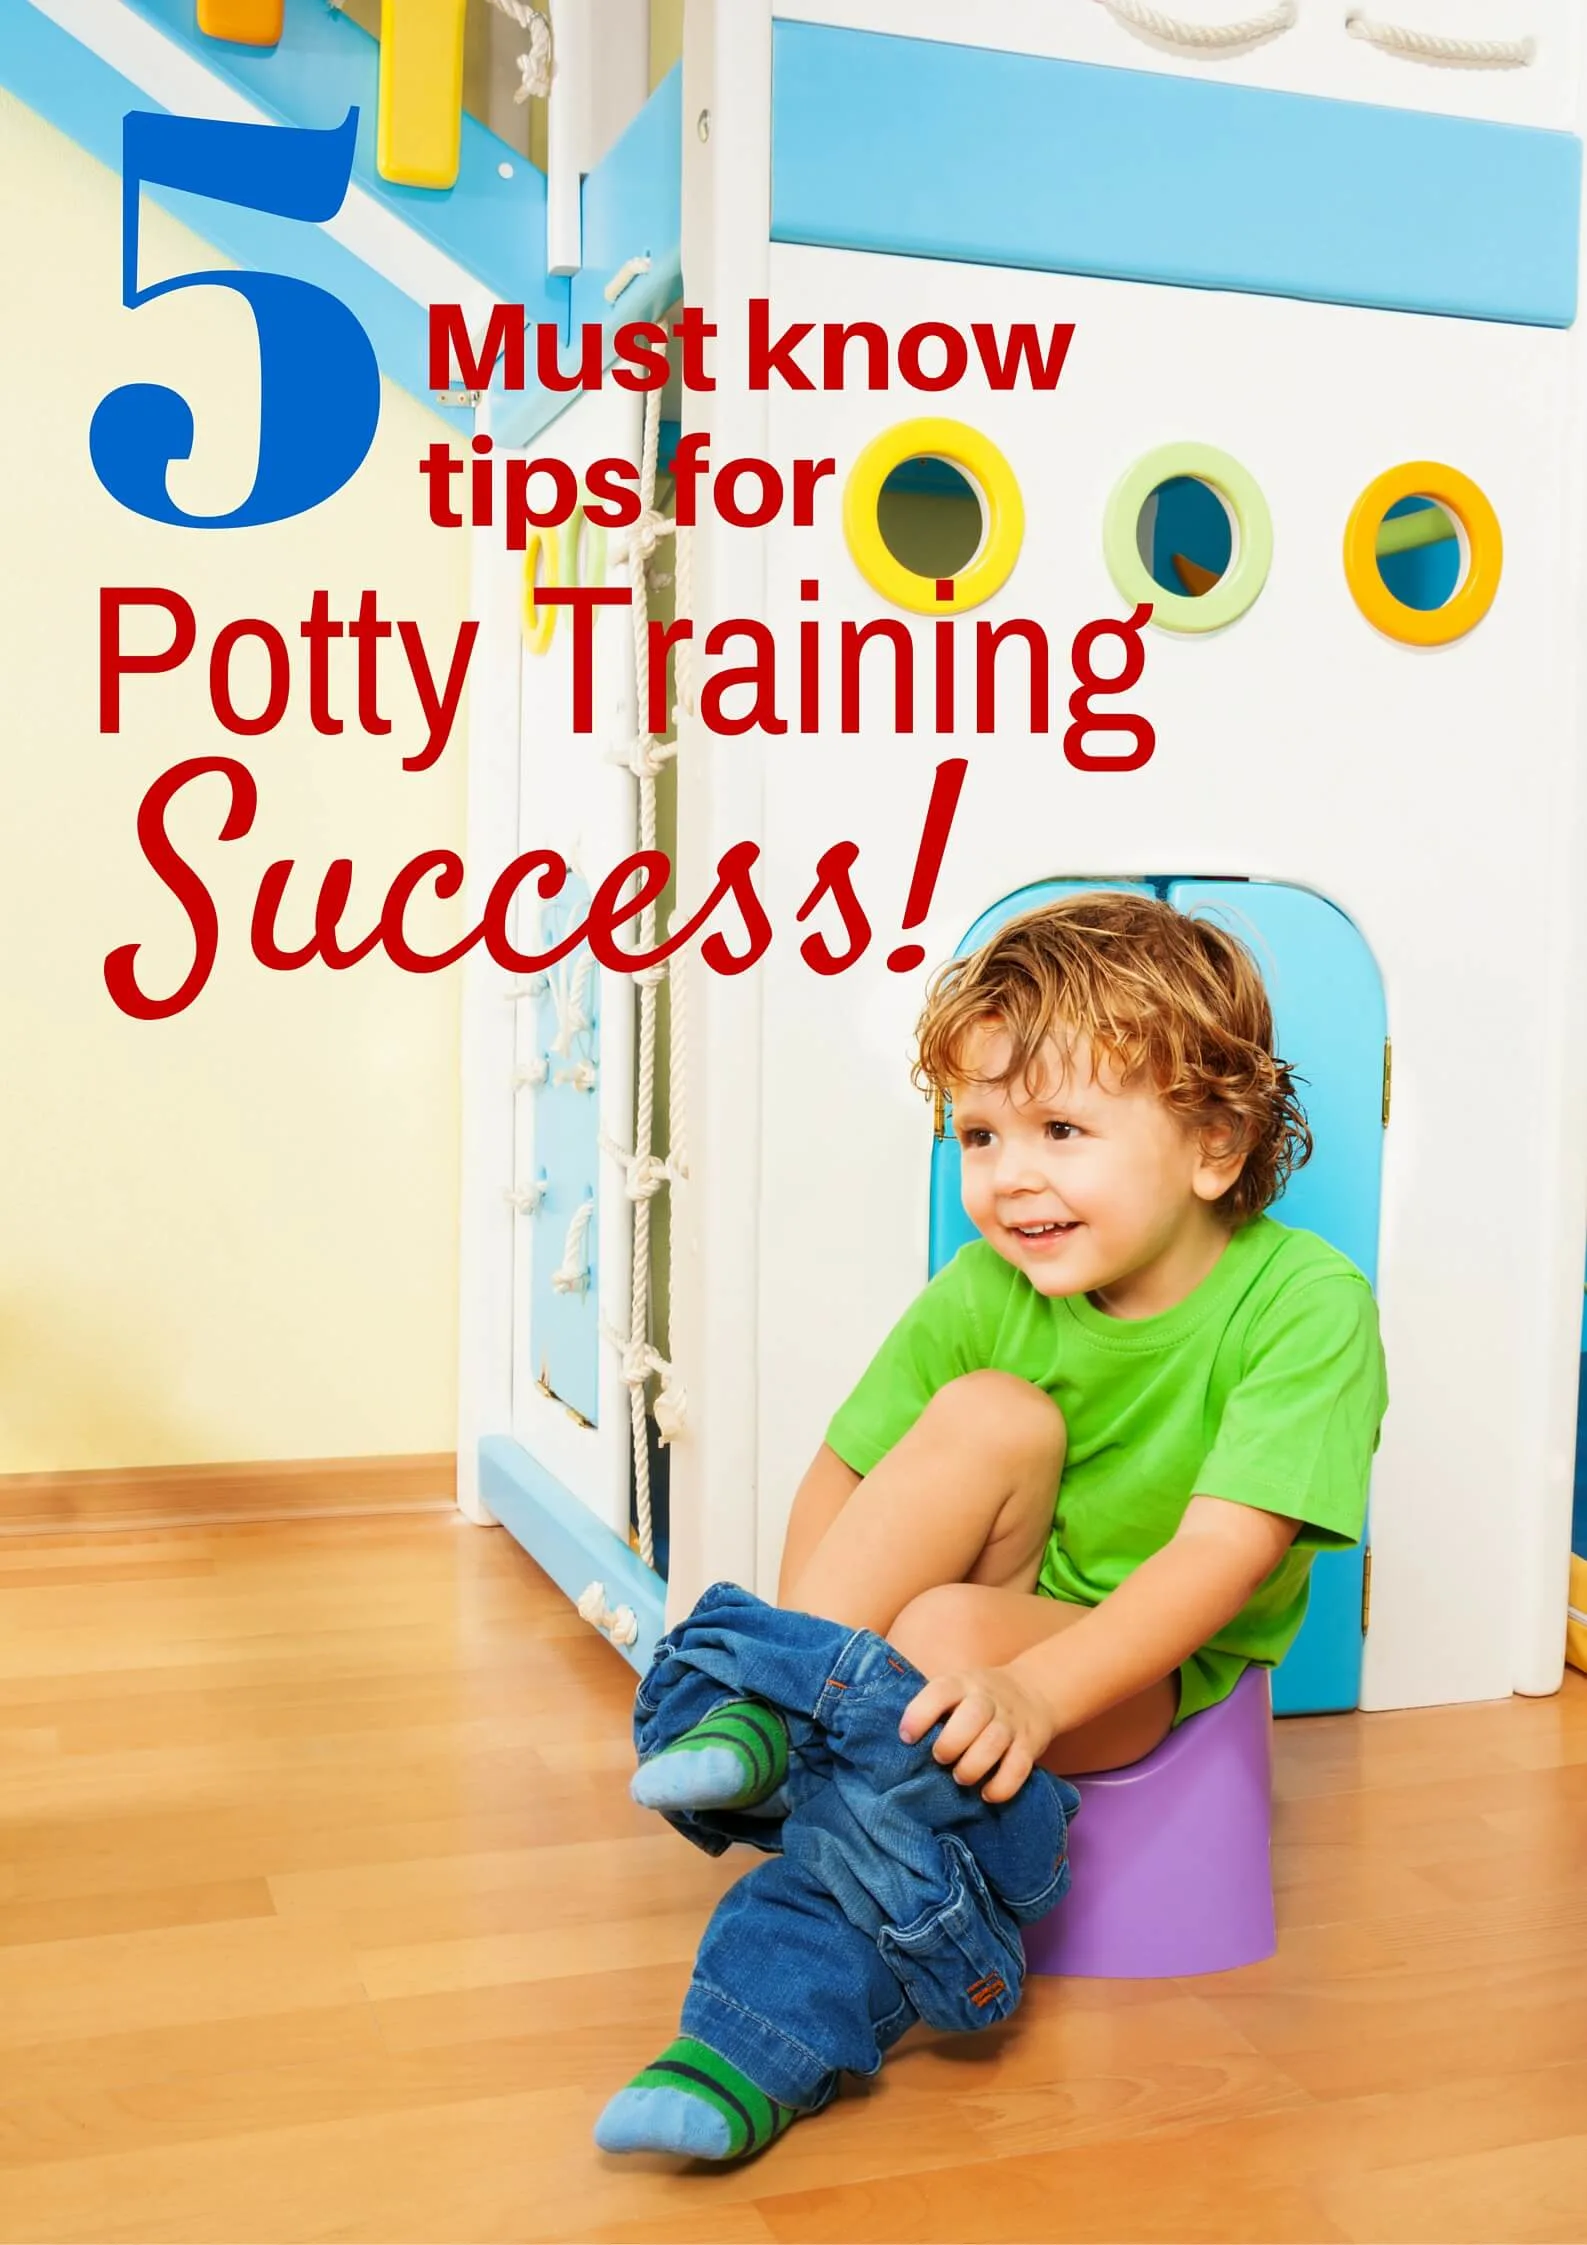 5 Must Know Potty Training Tips for Success